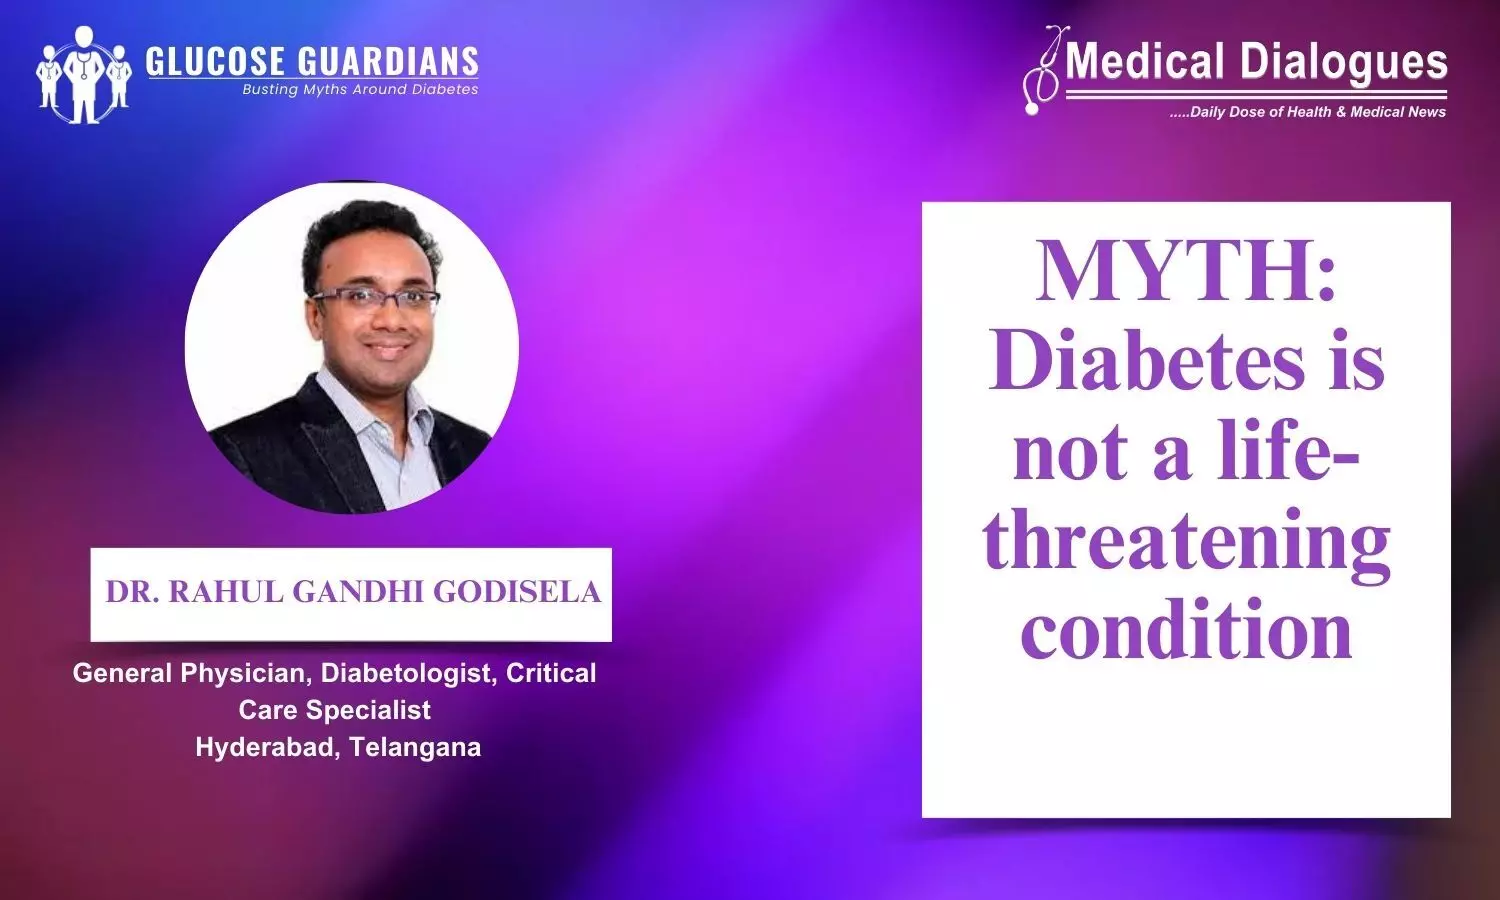 Is Diabetes a Potentially Life-Threatening Condition? - Dr Rahul Gandhi Godisela